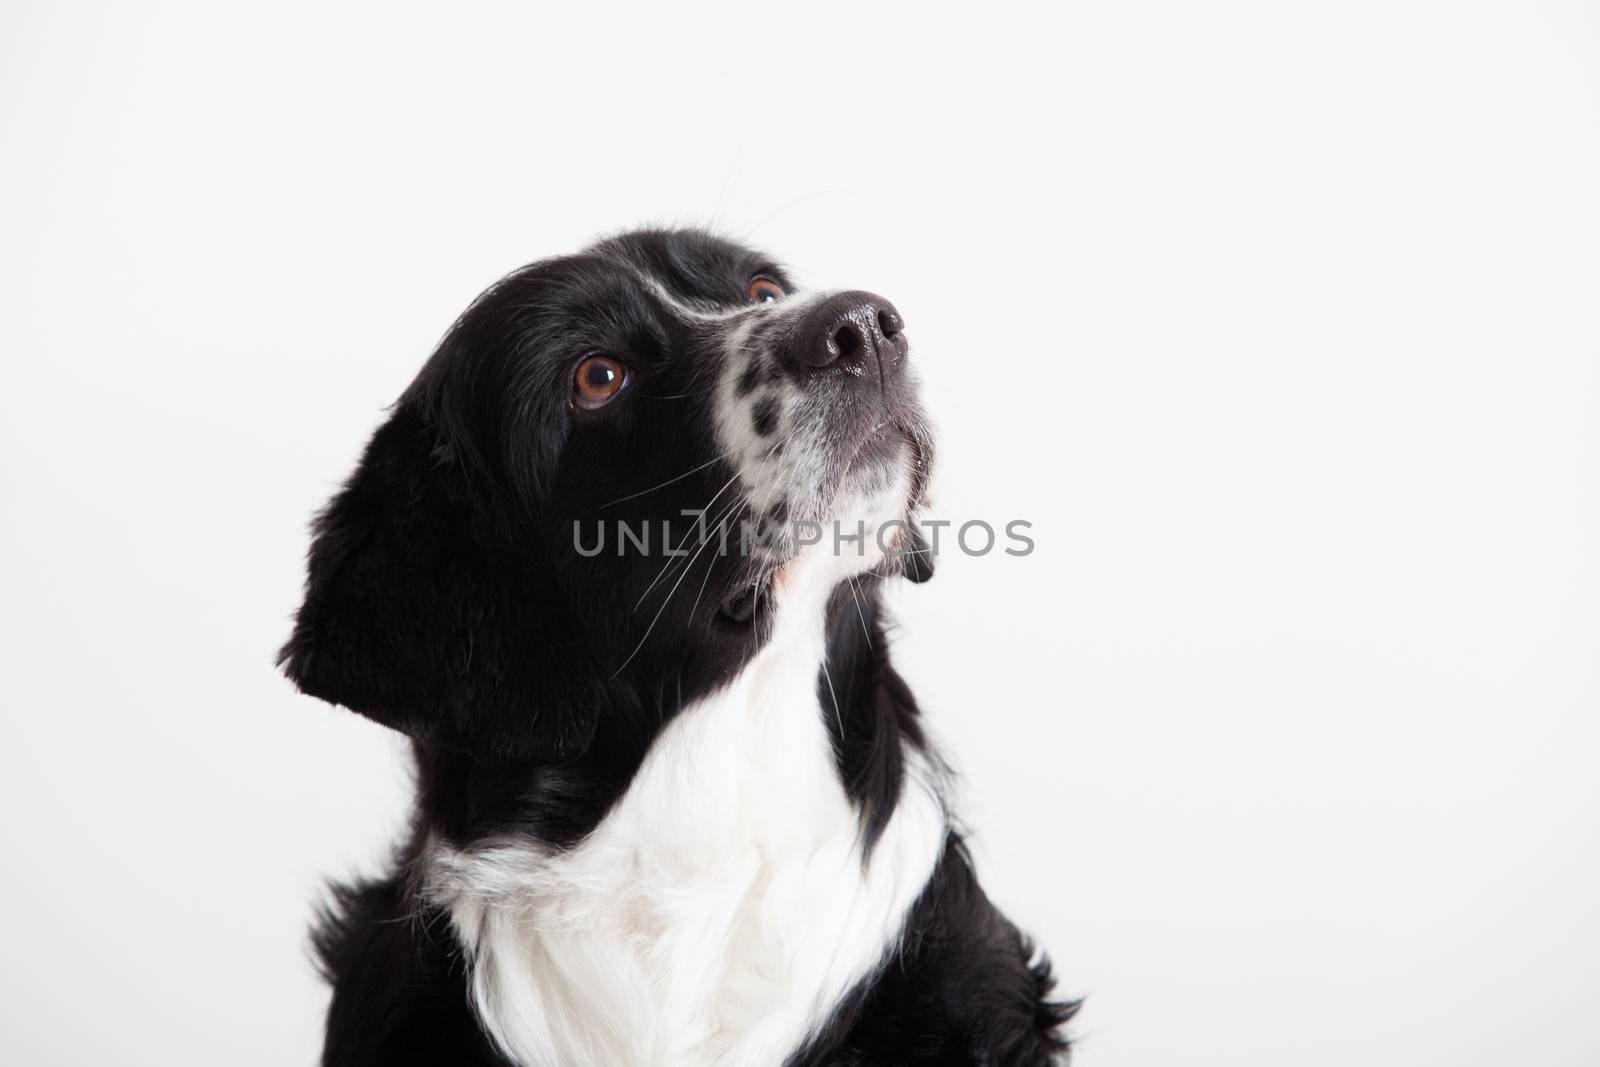 Happy dog photographed in the studio on a white background